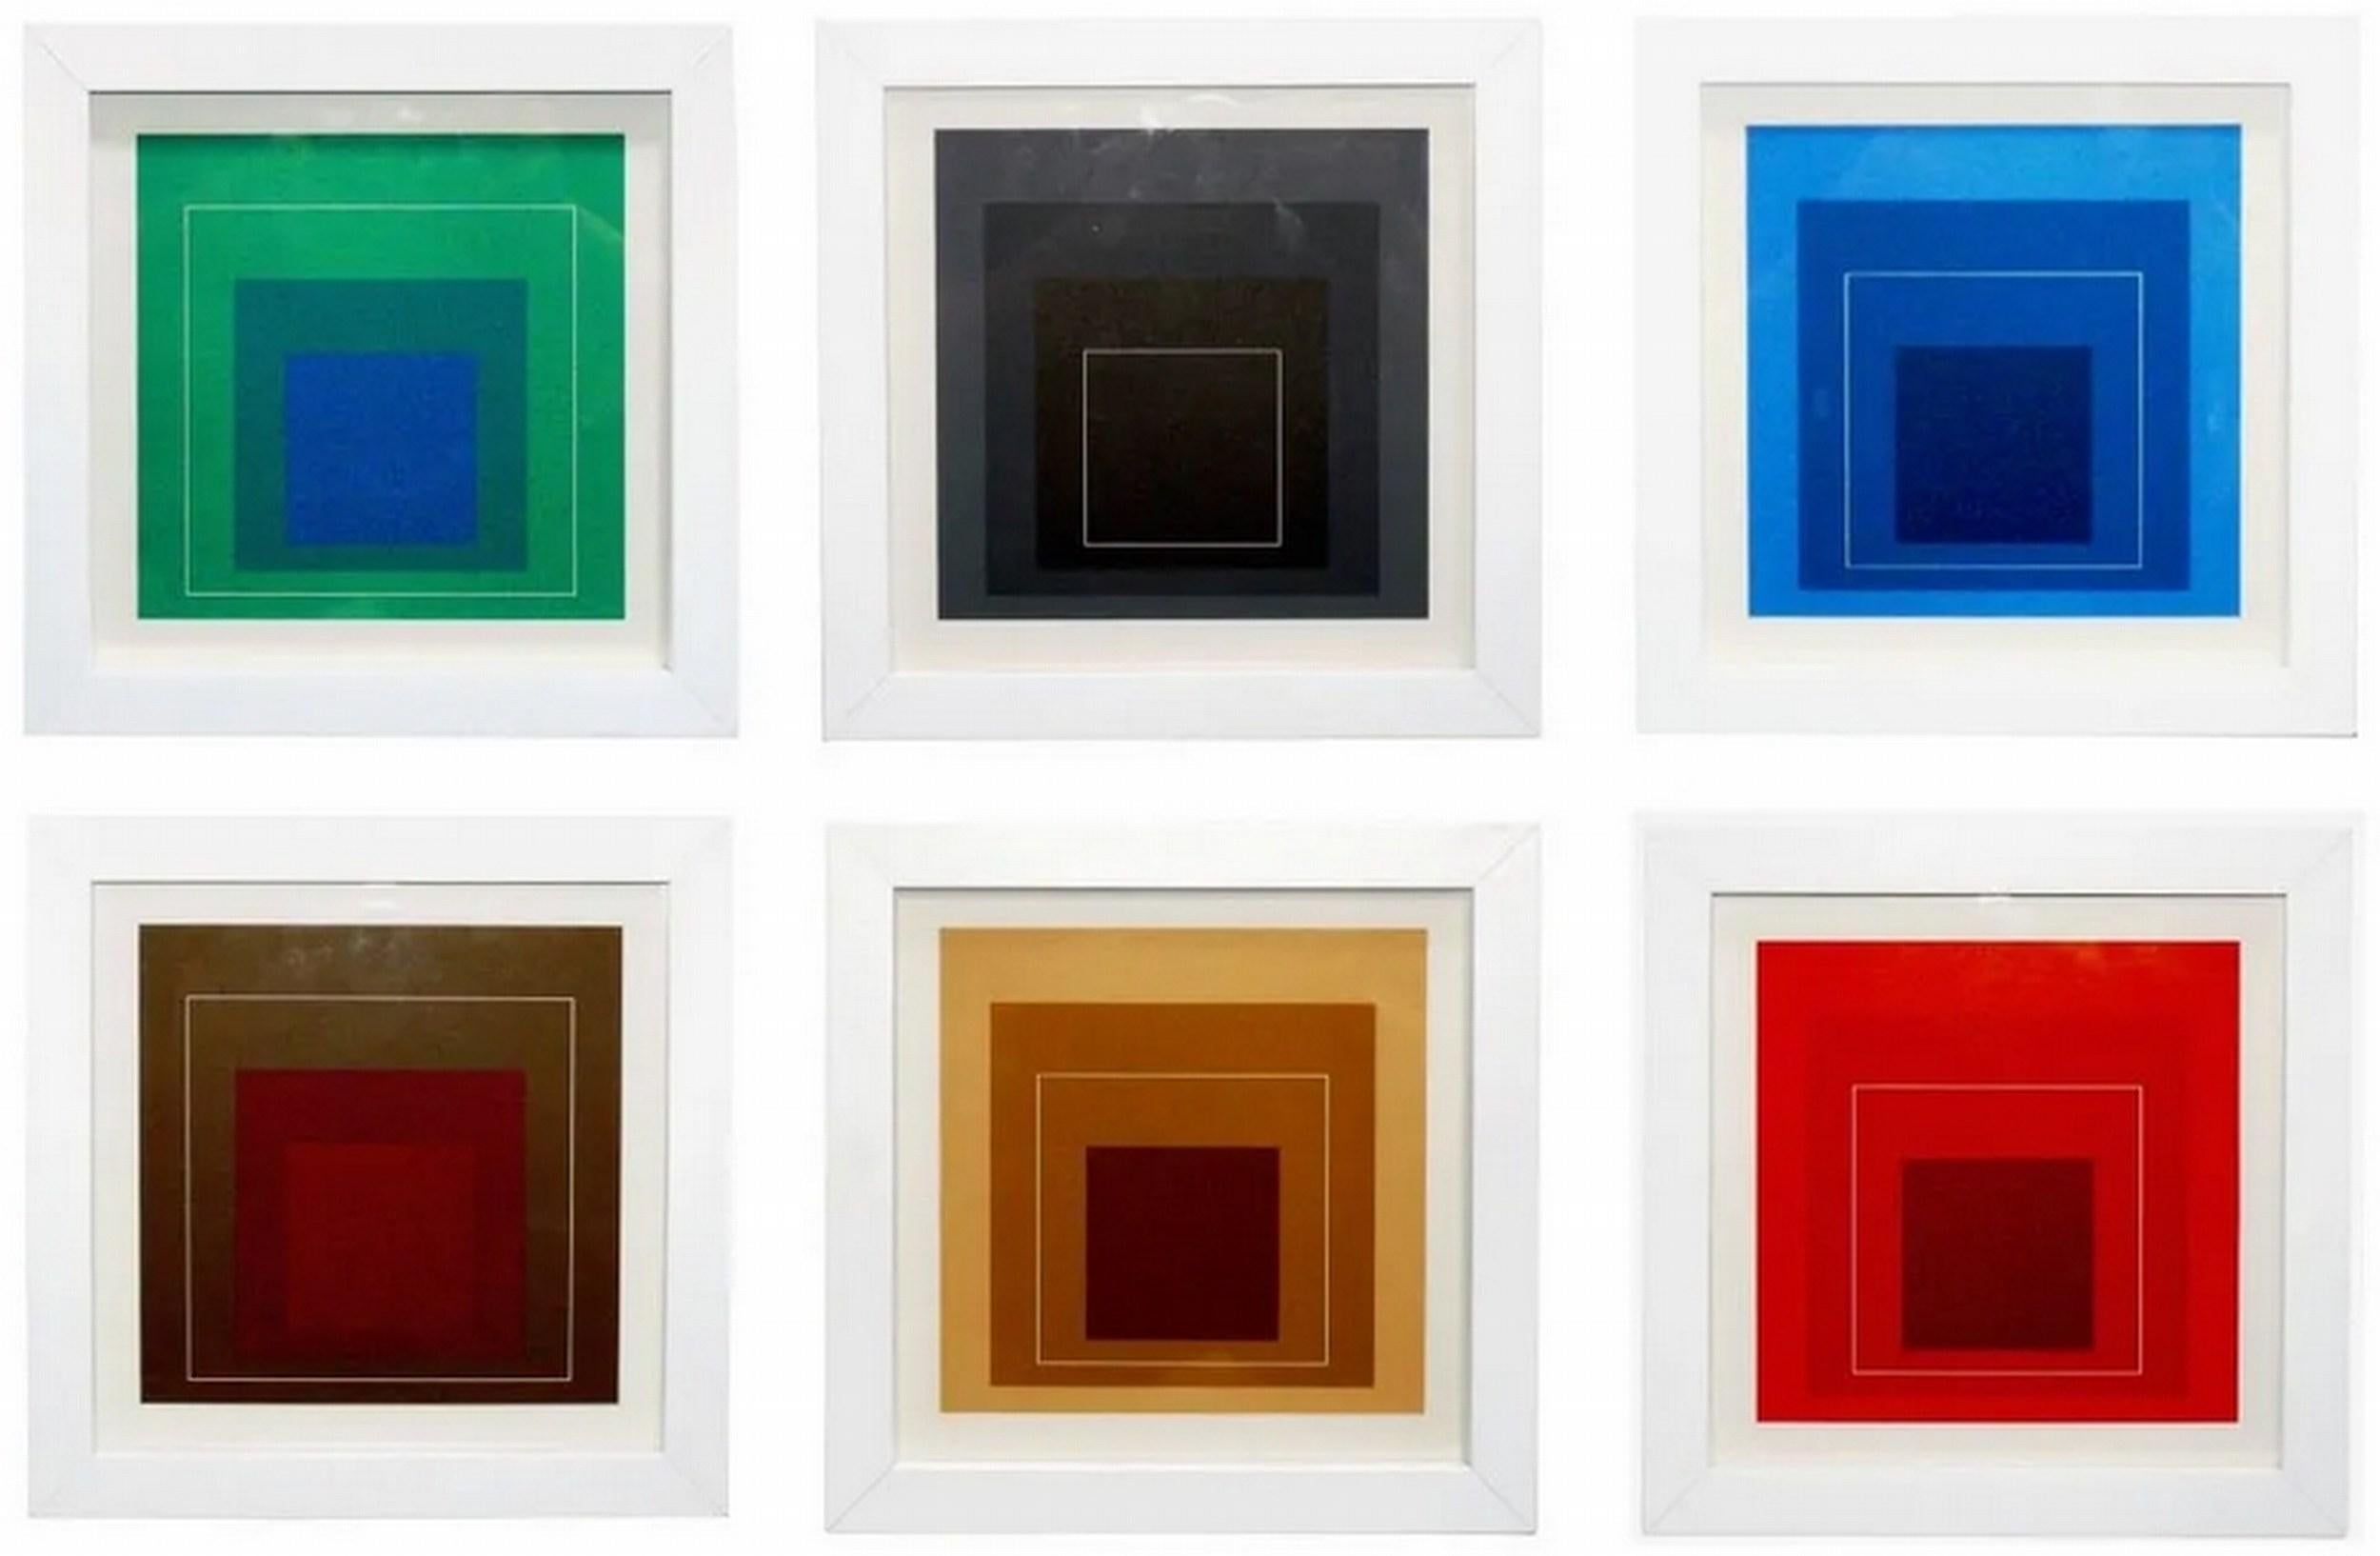 (after) Josef Albers Abstract Print - White Lines Squares - Set of 6 (Minimalism Bauhaus Homage Square - 25% OFF LIST)